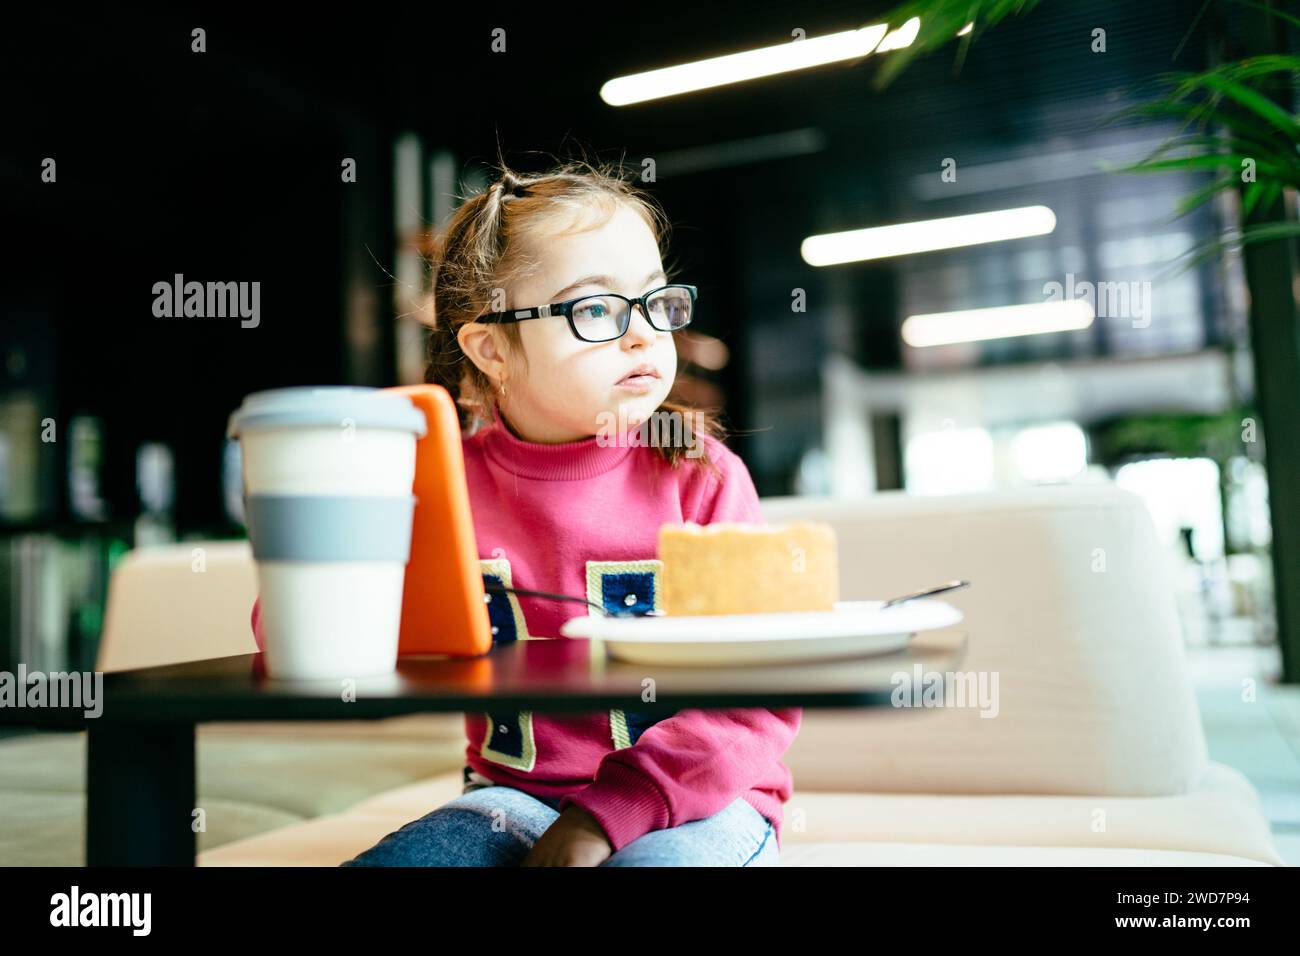 Cute little girl in eyeglasses using smartphone eating cake at cafe. Stock Photo